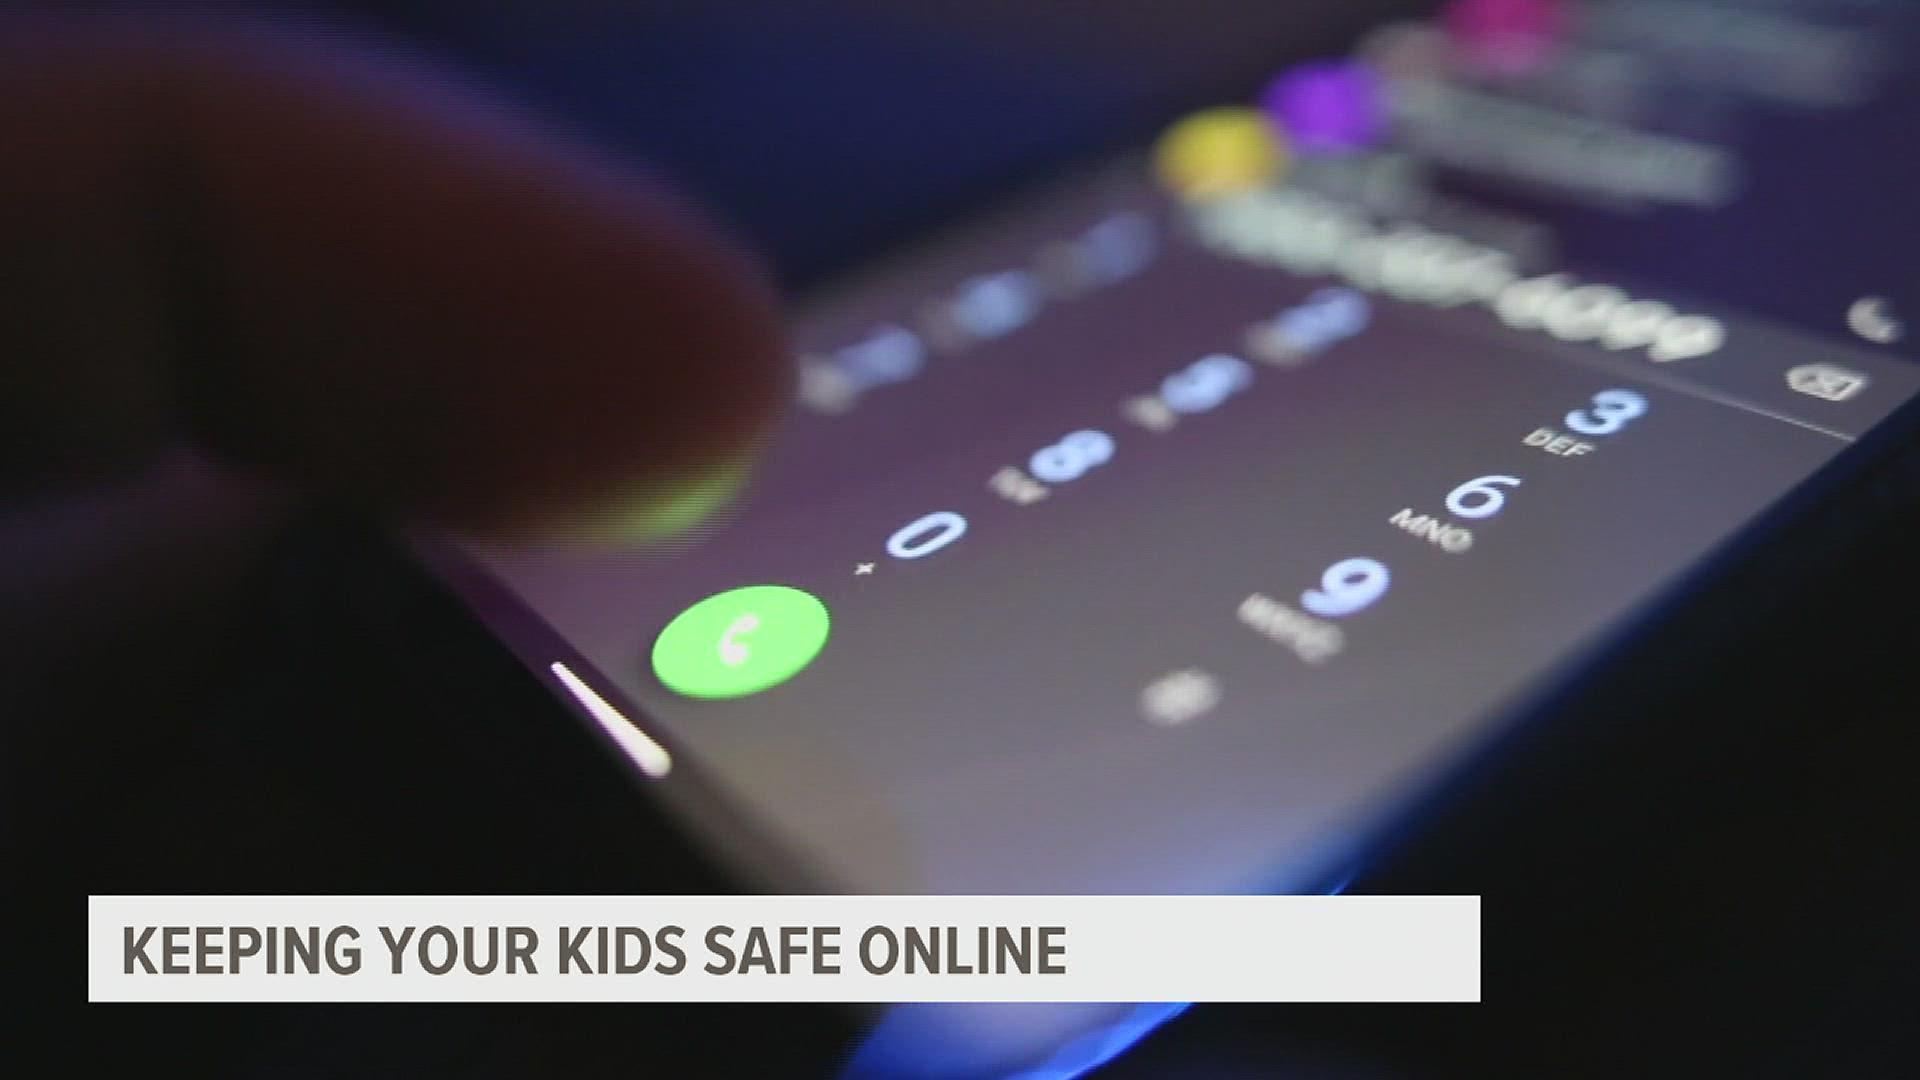 Officials are reminding parents why it's important to monitor what apps their children are using and how to protect their kids from dangers online.